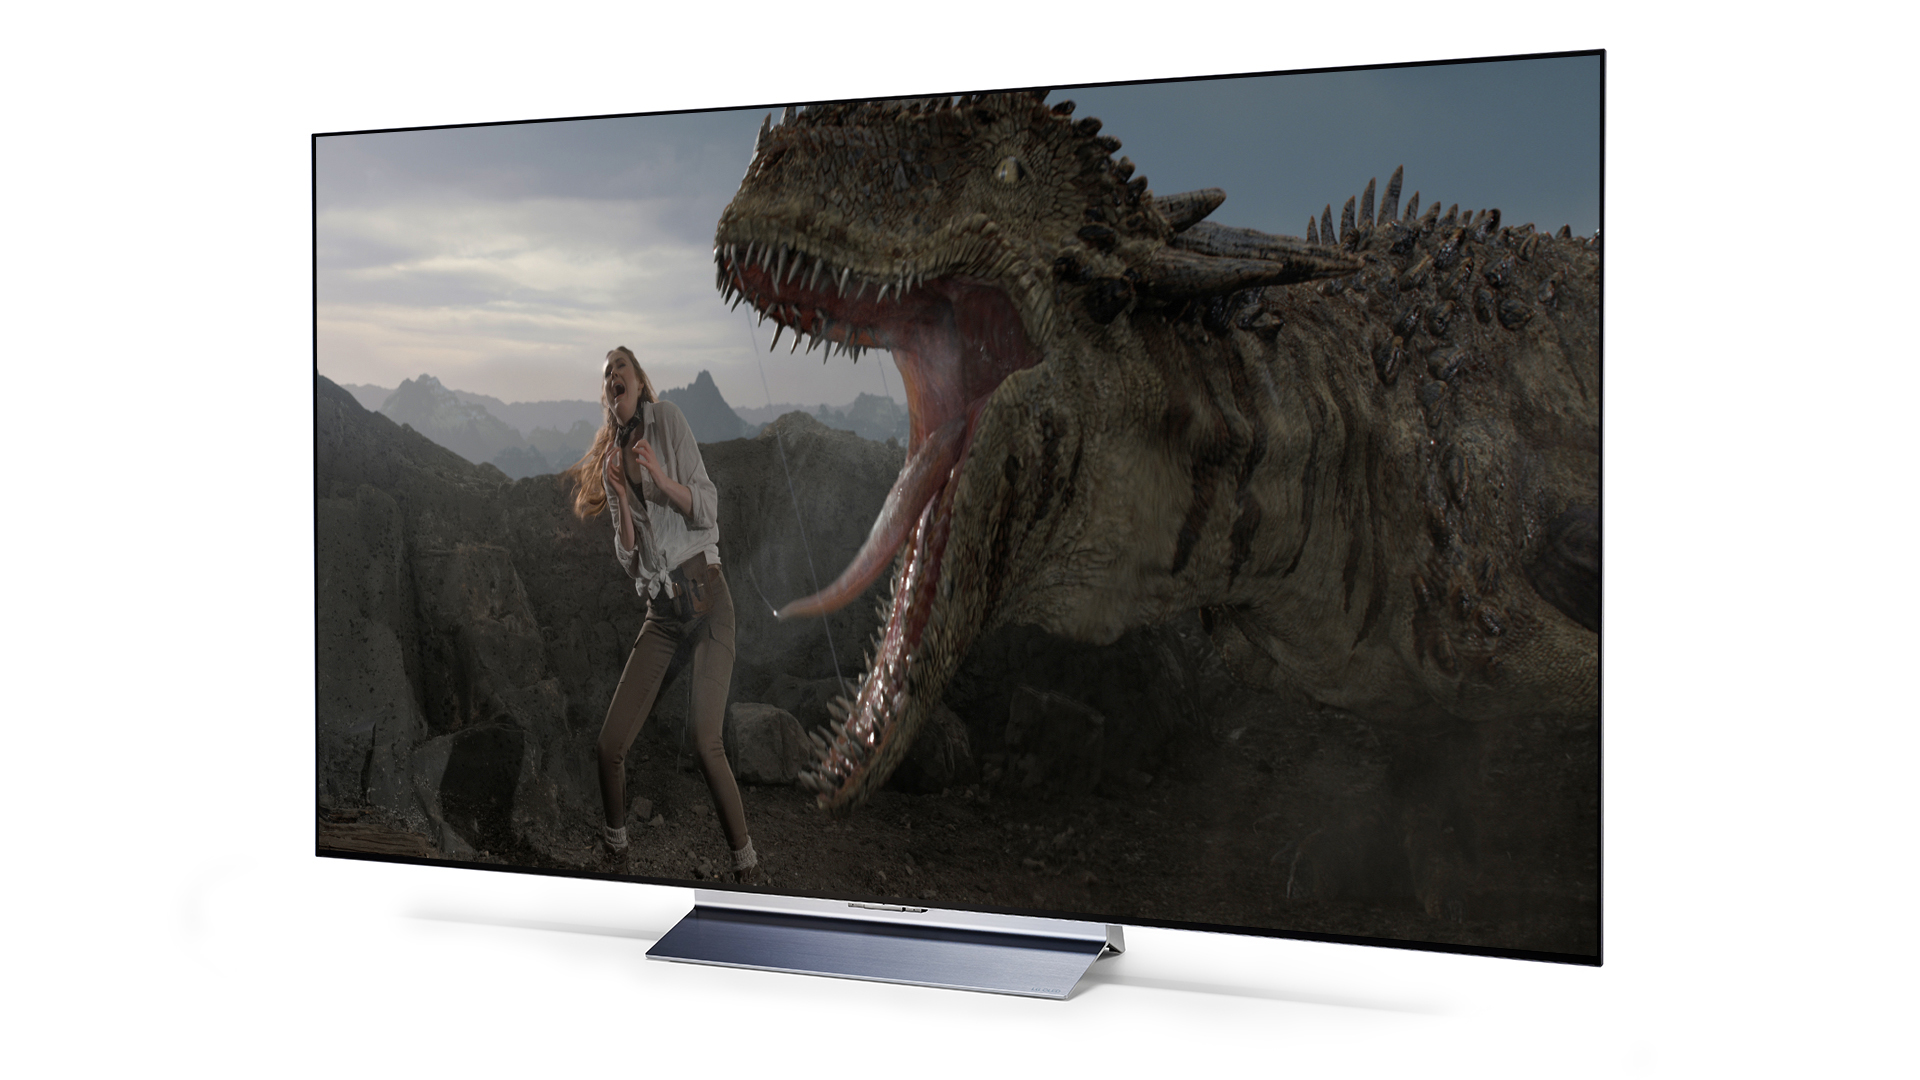 This 65-inch LG G2 OLED can be yours for as low as £1166 with a discount  code combo from LG